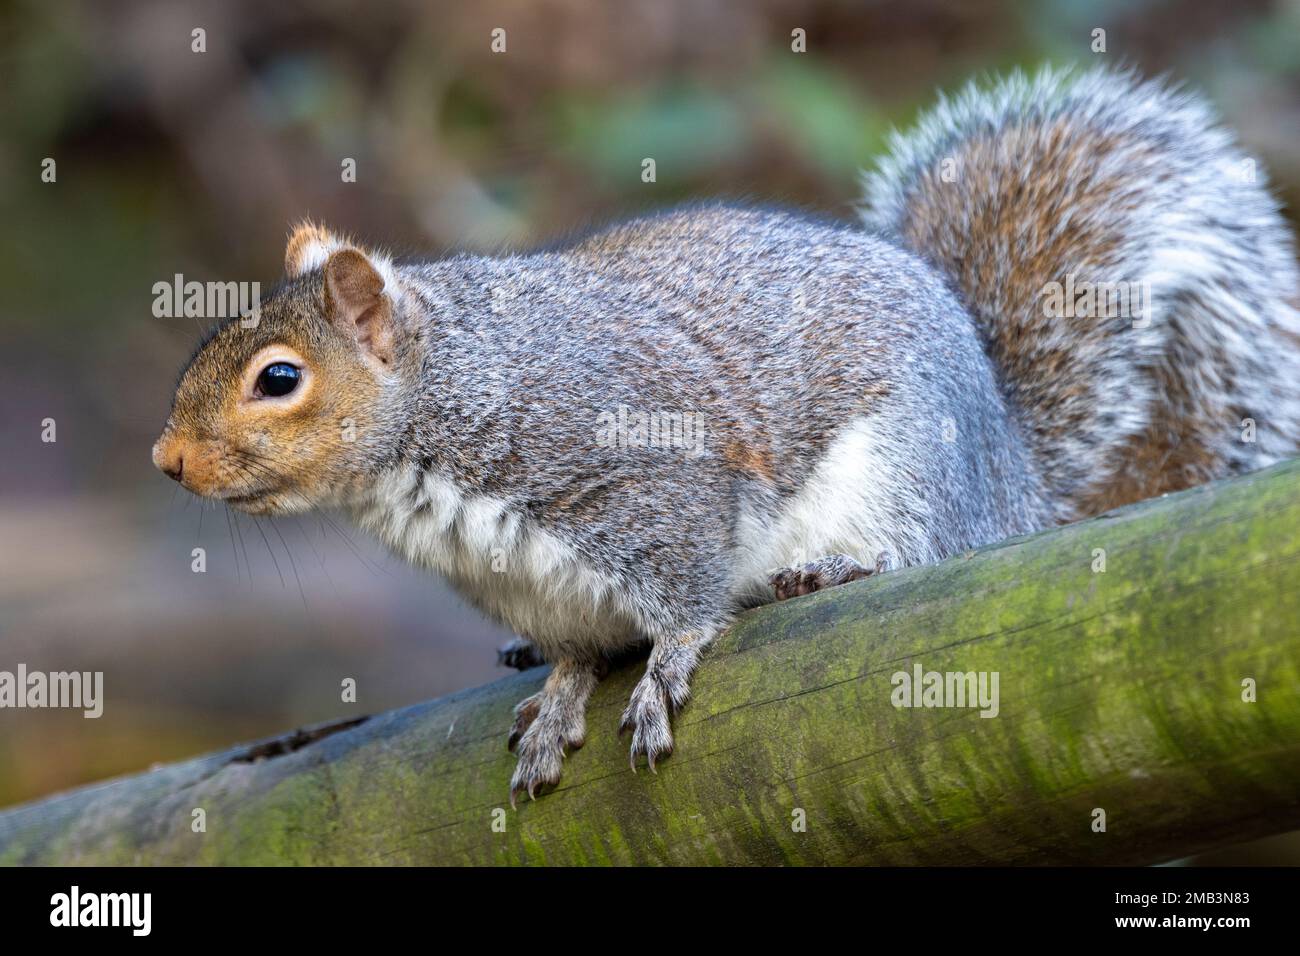 The Grey Squirrel is now a common sight in UK Parks and gardens, having been introduced from North America at the expense of indigenous Red Squirrels. Stock Photo